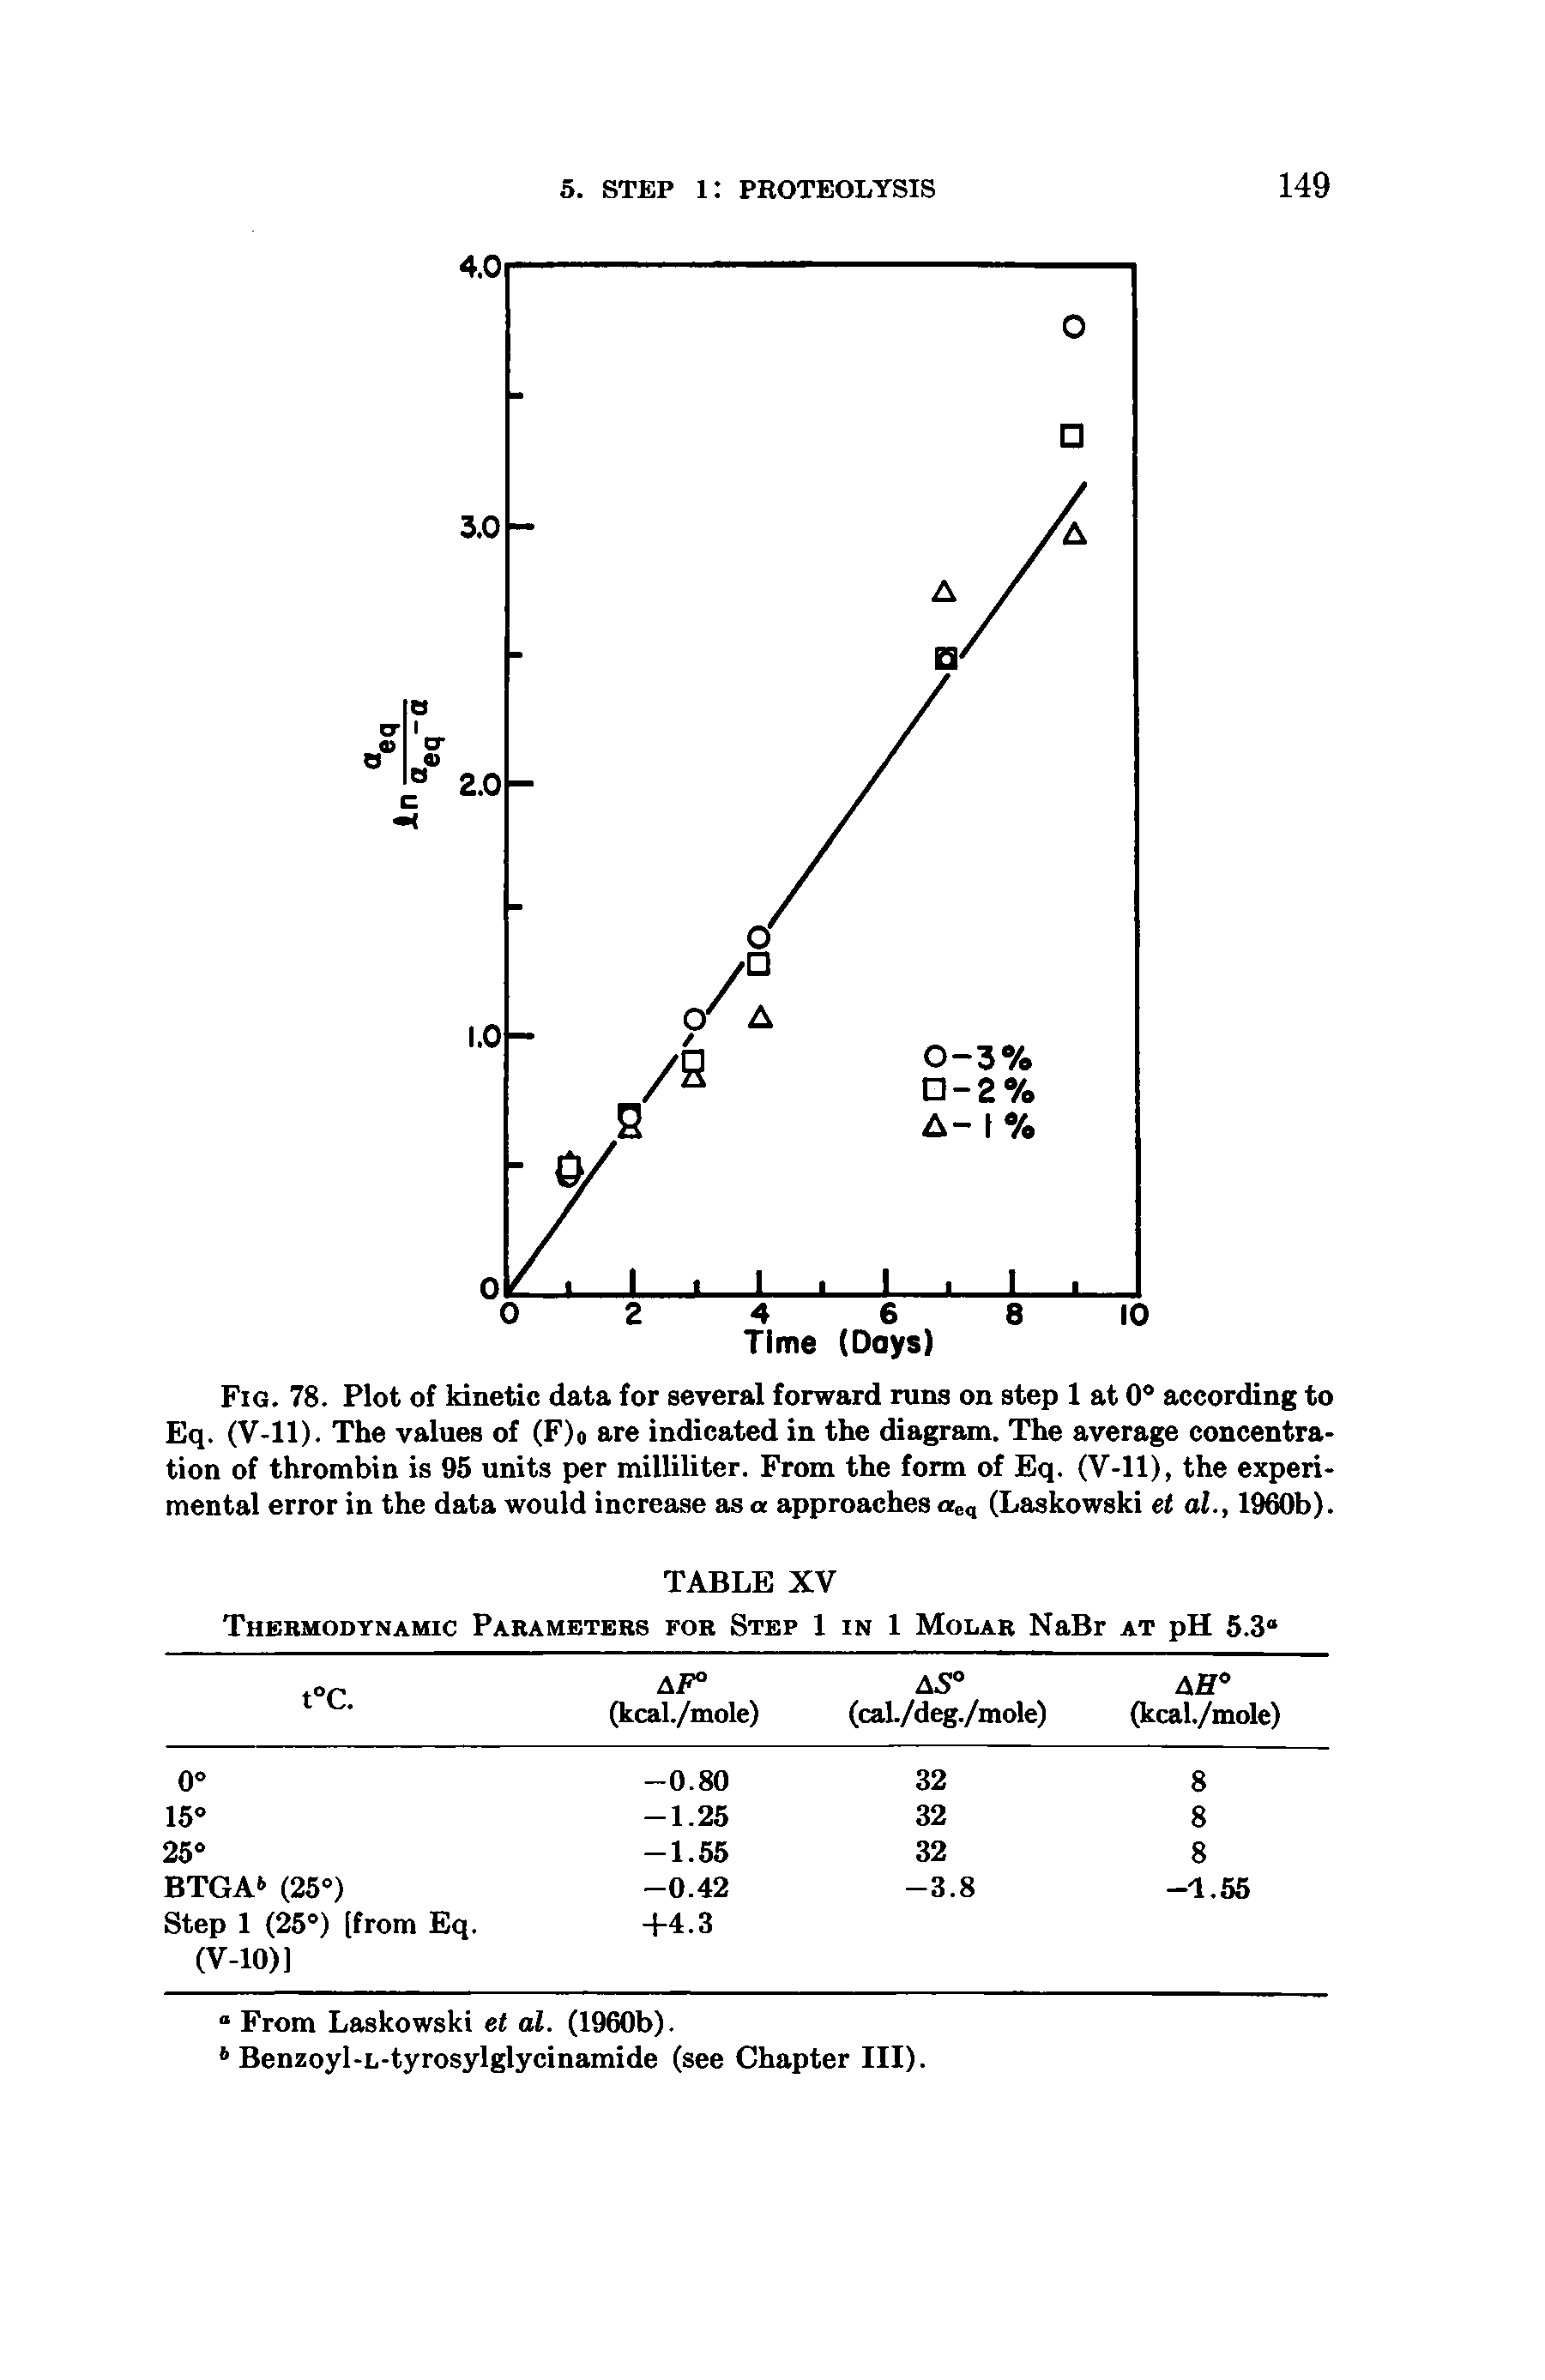 Fig. 78. Plot of kinetic data for several forward runs on step 1 at 0 according to Eq. (V-ll). The values of (F)o are indicated in the diagram. The average concentration of thrombin is 95 units per milliliter. From the form of Eq. (V-ll), the experimental error in the data would increase as a approaches ae, (Laskowski el al., 19 b).